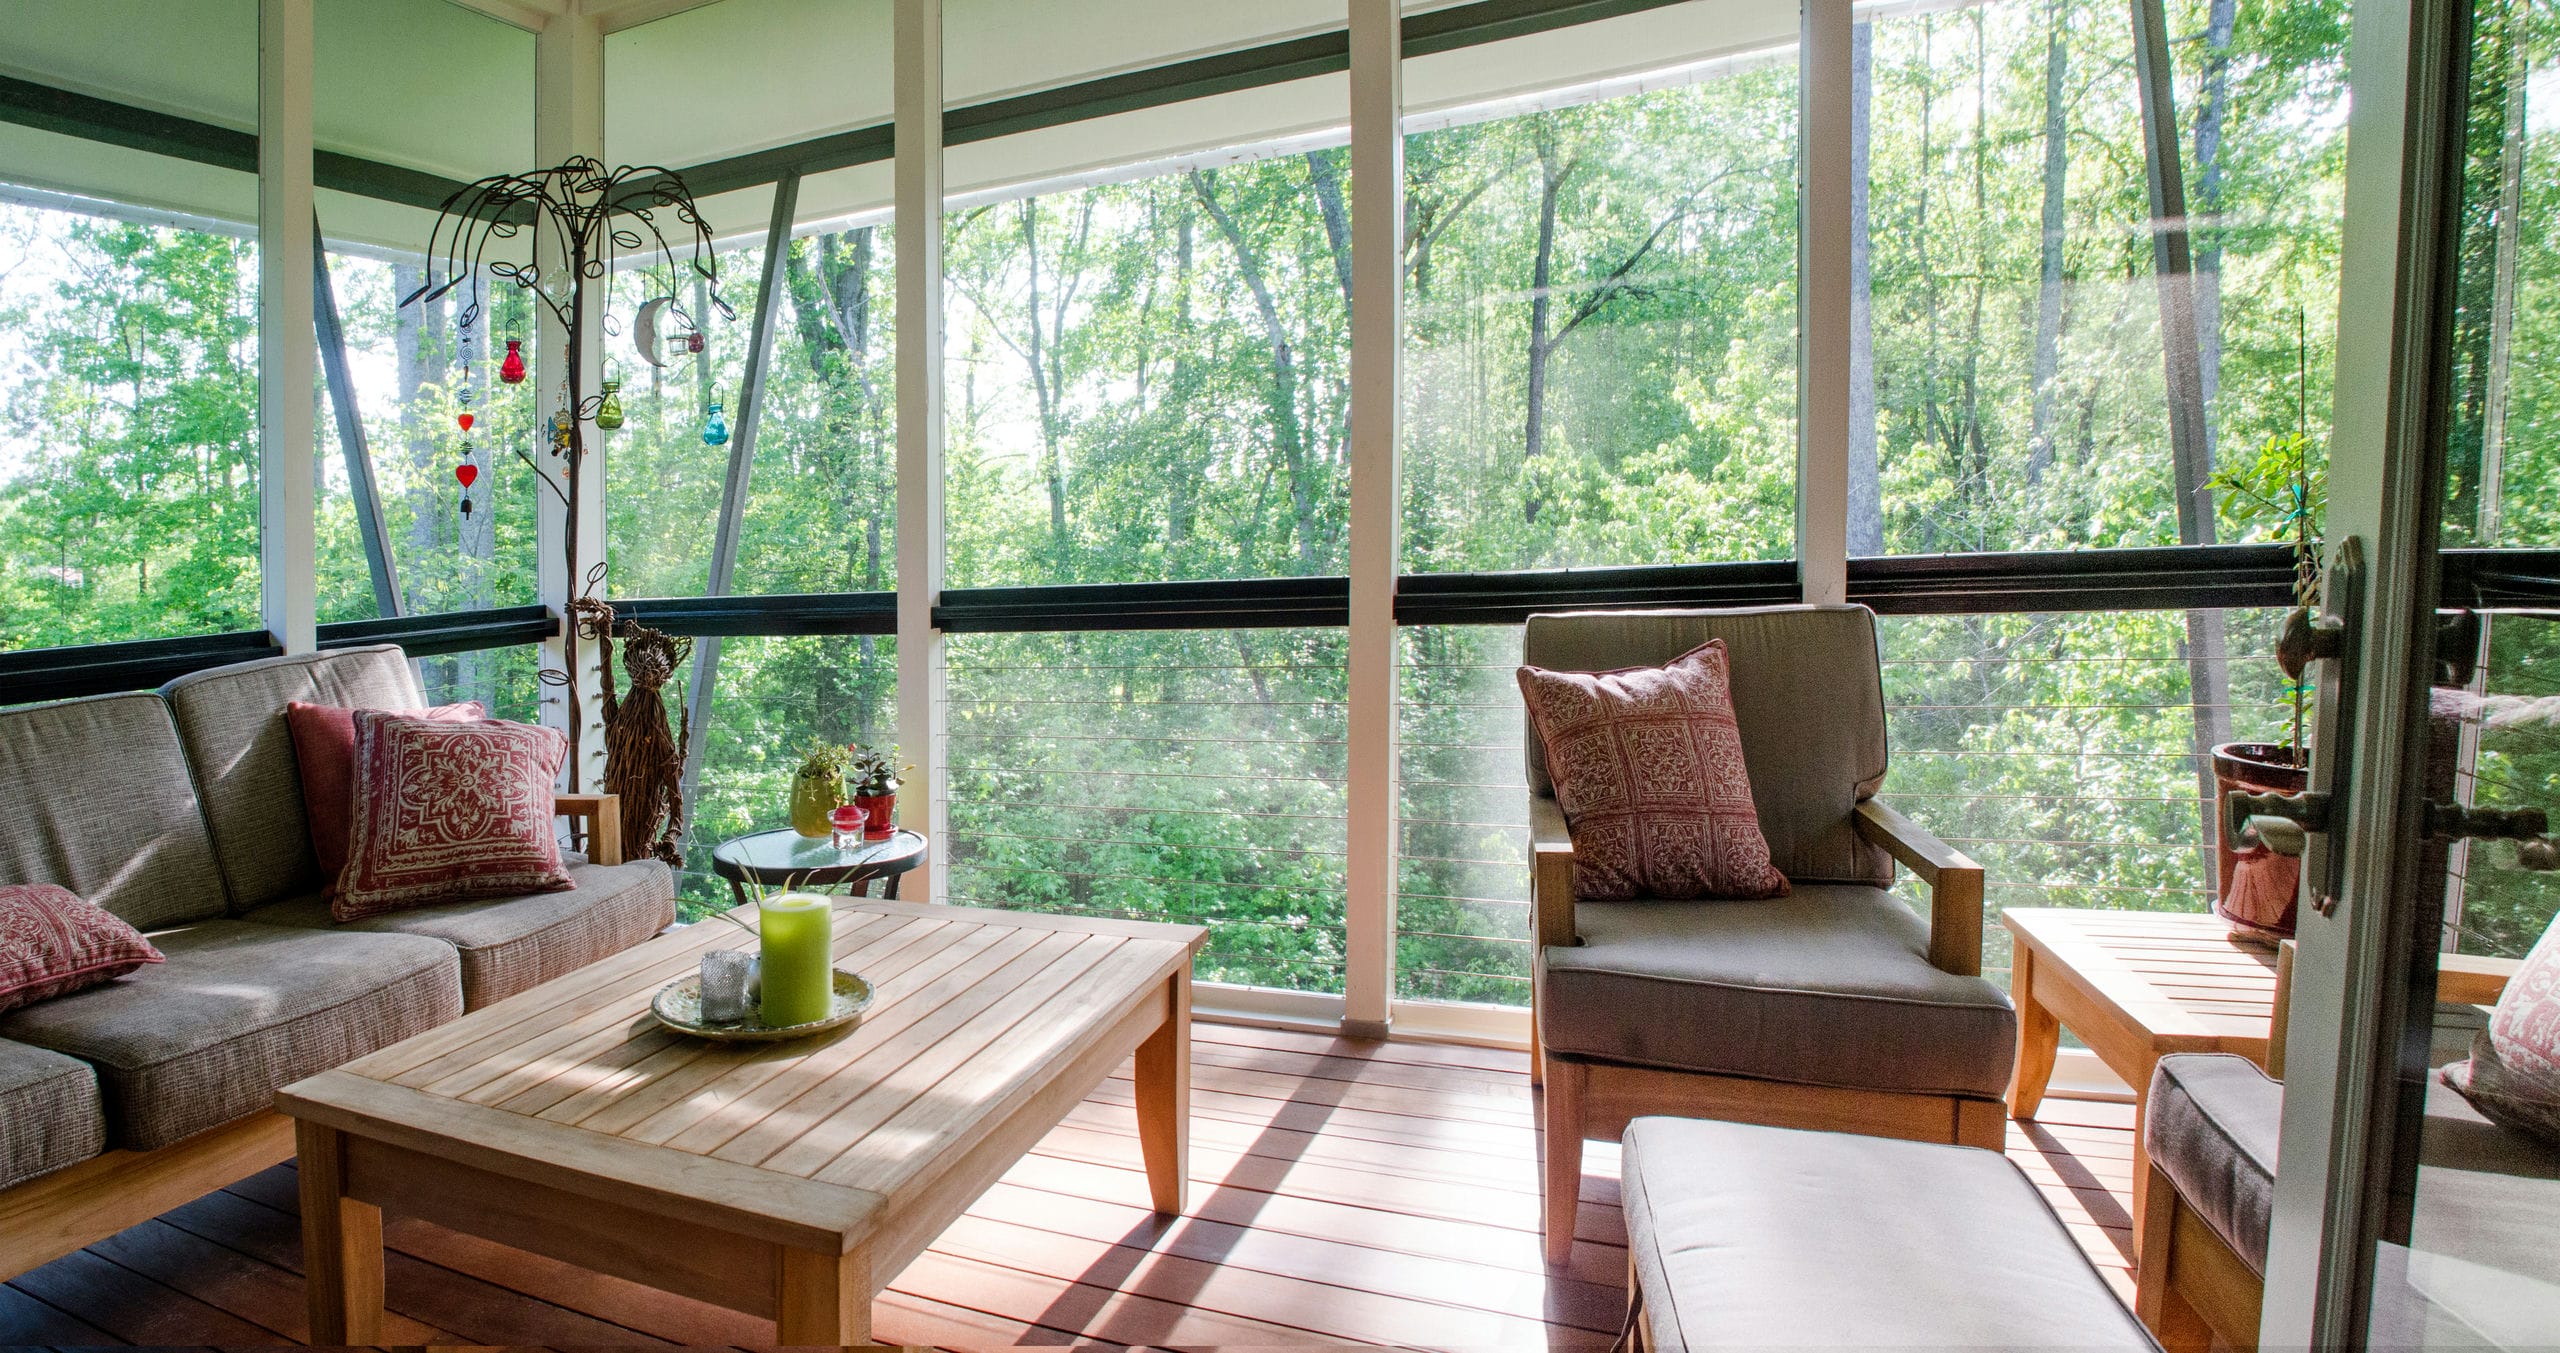 Upper level cantilevered screened porch with contemporary cable railings creates a sense of floating among the trees.